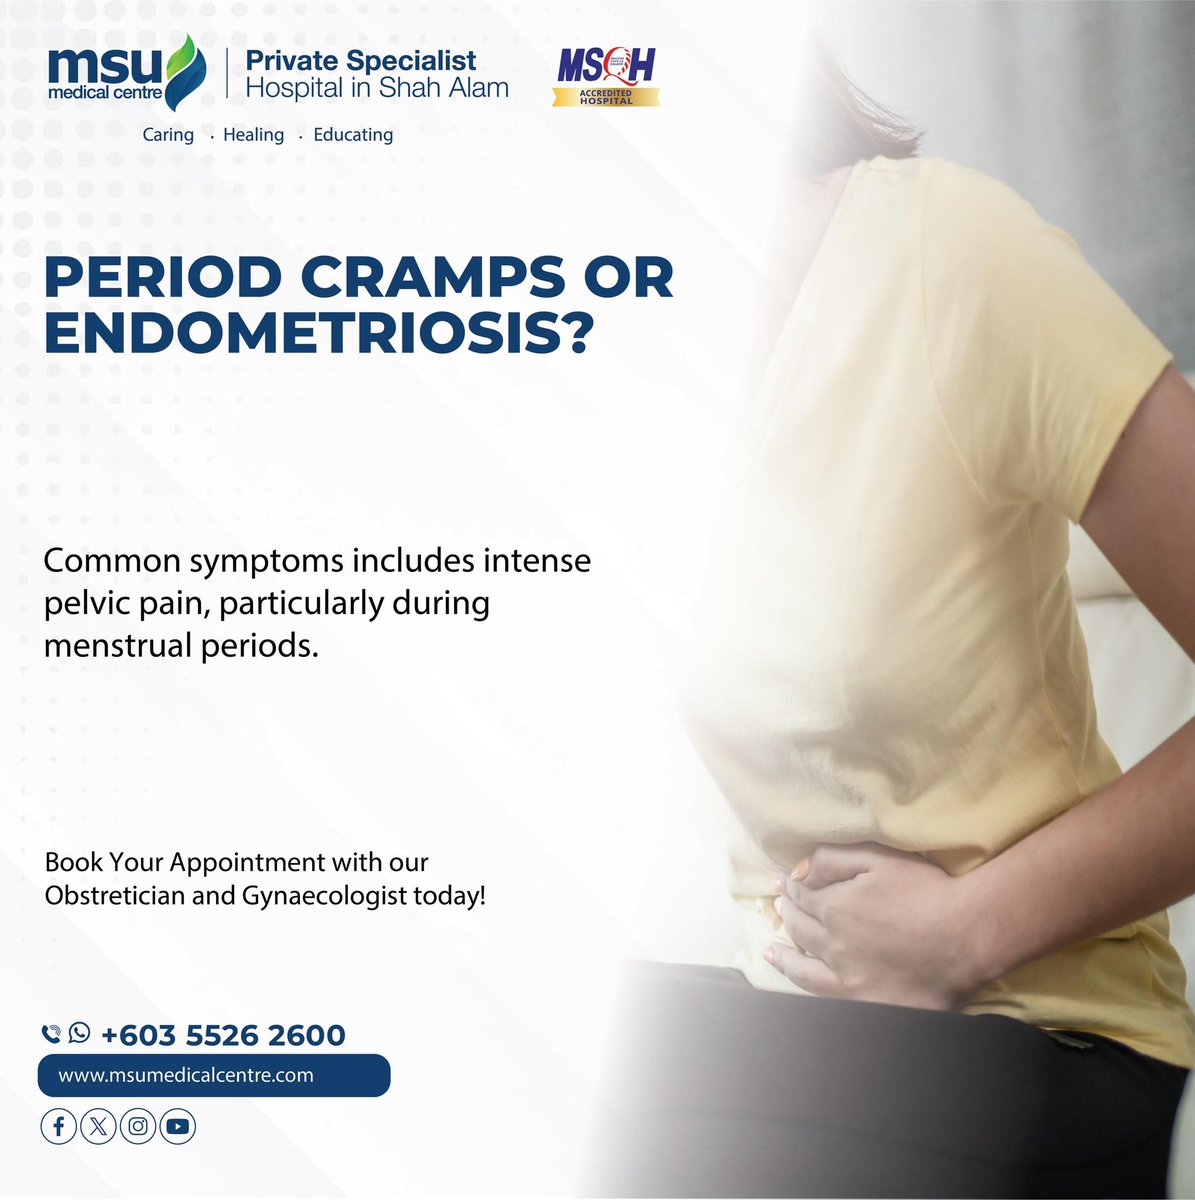 If you have unusually painful cramps during your menstrual period, you may wonder if you have endometriosis. Scheduled an appointment with our Obstetrician and Gynecologist! Visit our website at msumedicalcentre.com or call 03-55262600. #CaringHealingEducating #MSUMC